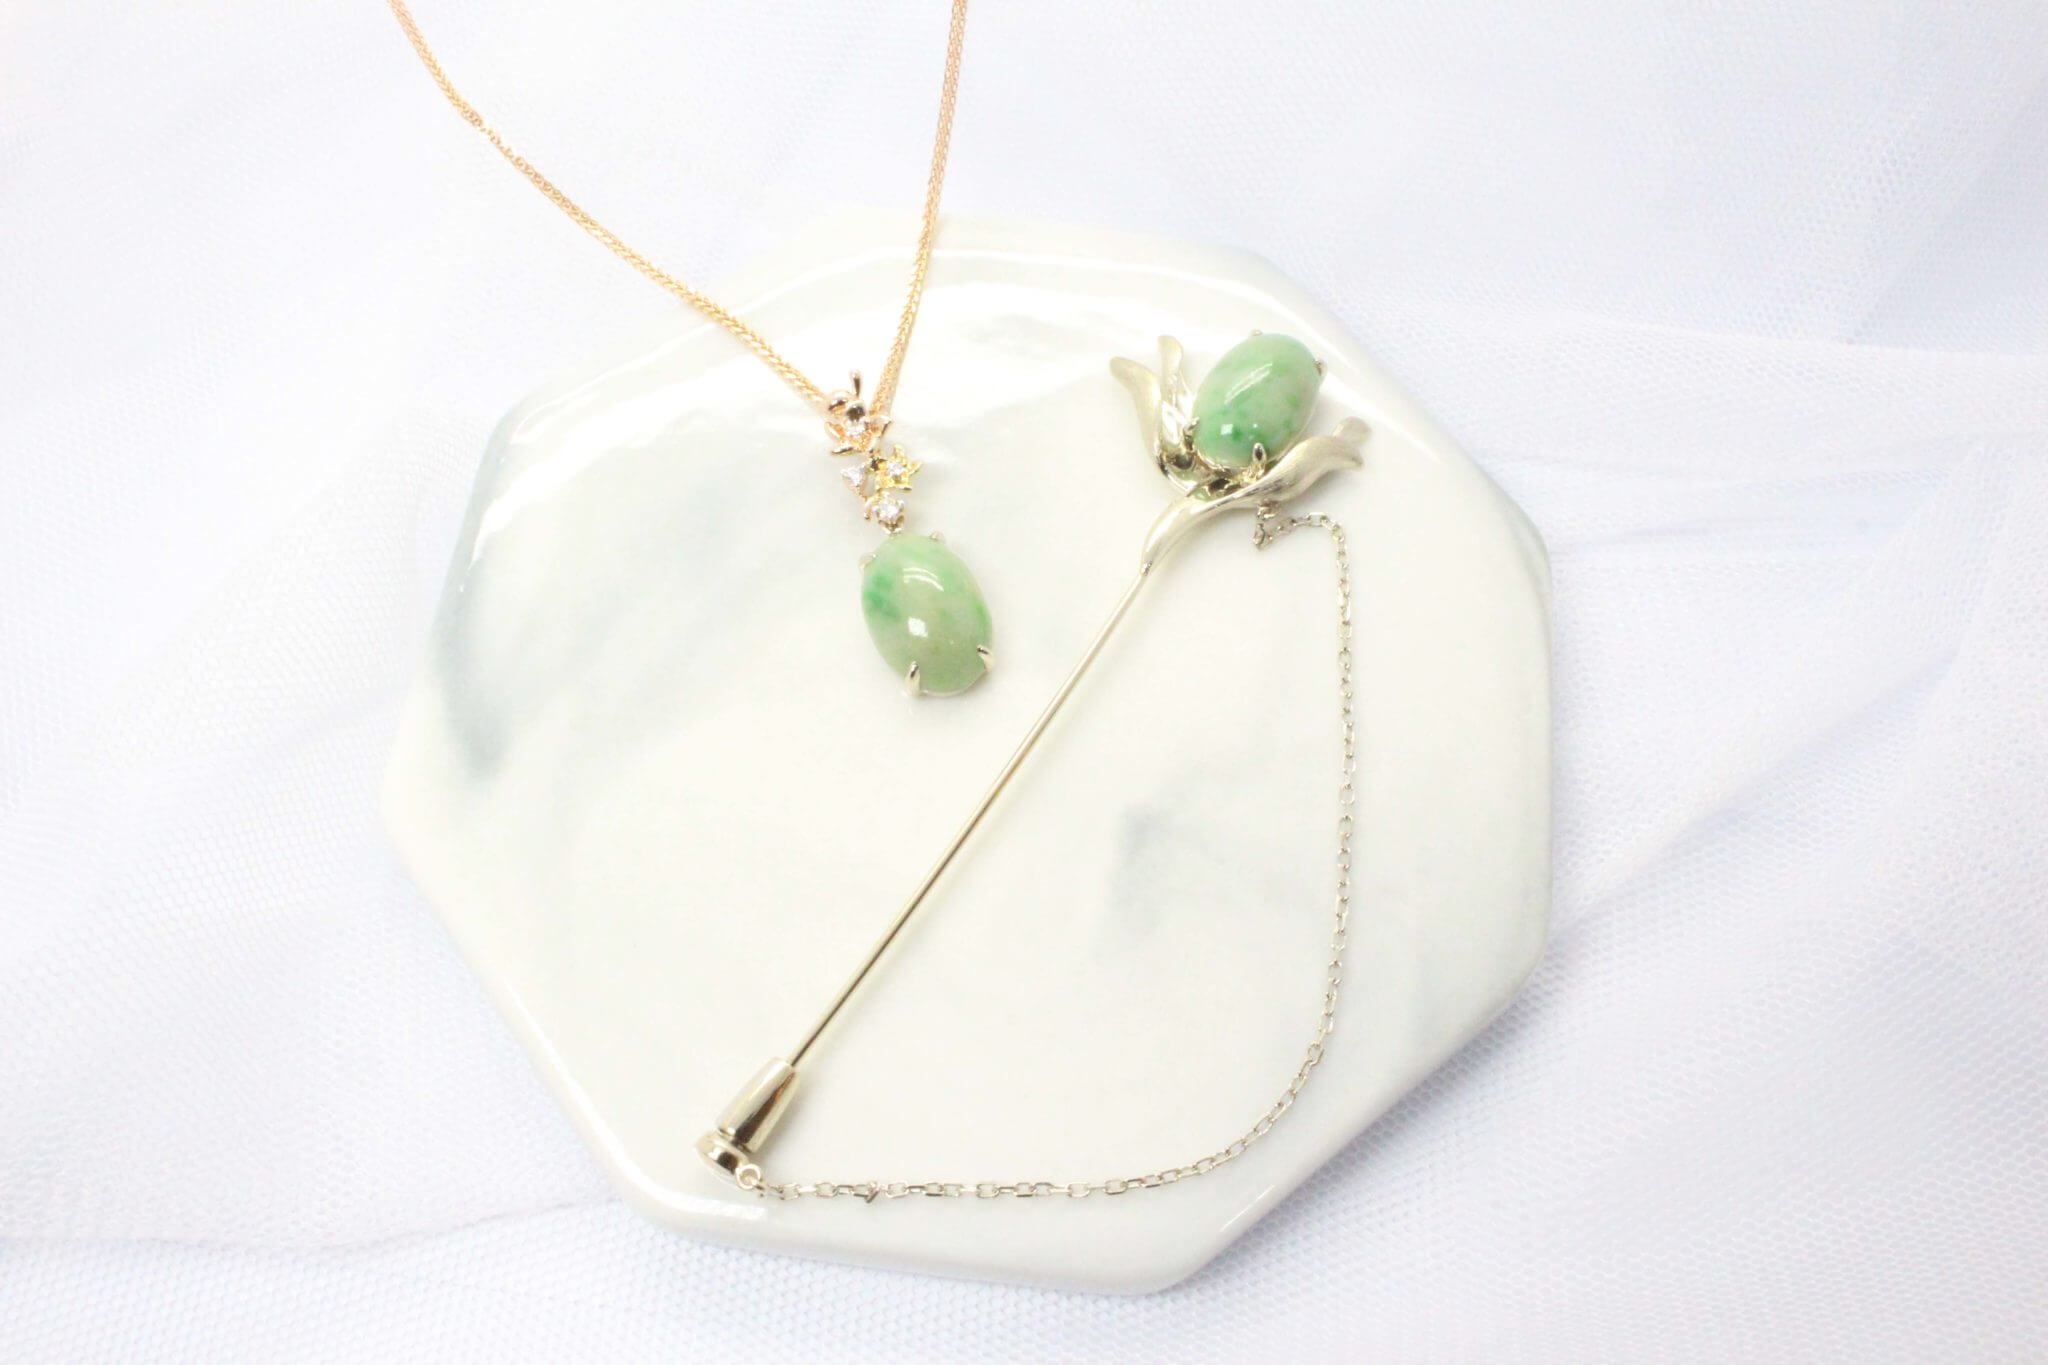 Customised Wedding Jewellery with Heirloom Jade Jewellery in Natural White Gold, Customised Jade pendant and label Pin | Local Singapore Jeweller in Bespoke Customised Wedding Jewellery